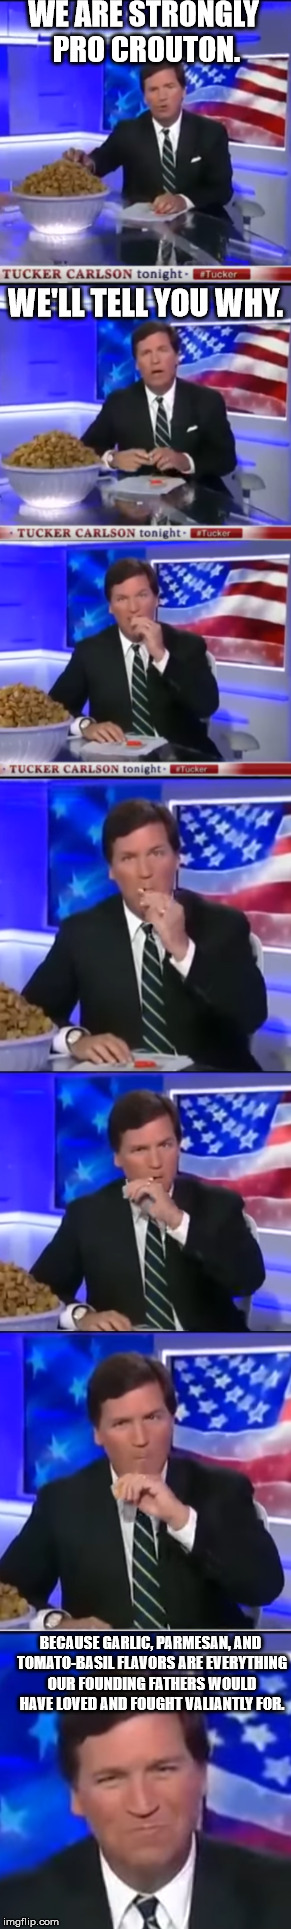 Tucker Carlson is pro crouton, unless they have onions. | WE ARE STRONGLY PRO CROUTON. WE'LL TELL YOU WHY. BECAUSE GARLIC, PARMESAN, AND TOMATO-BASIL FLAVORS ARE EVERYTHING OUR FOUNDING FATHERS WOULD HAVE LOVED AND FOUGHT VALIANTLY FOR. | image tagged in tucker carlson,breaking news,fox news,politics lol,tucker carlson tonight,hilarious | made w/ Imgflip meme maker